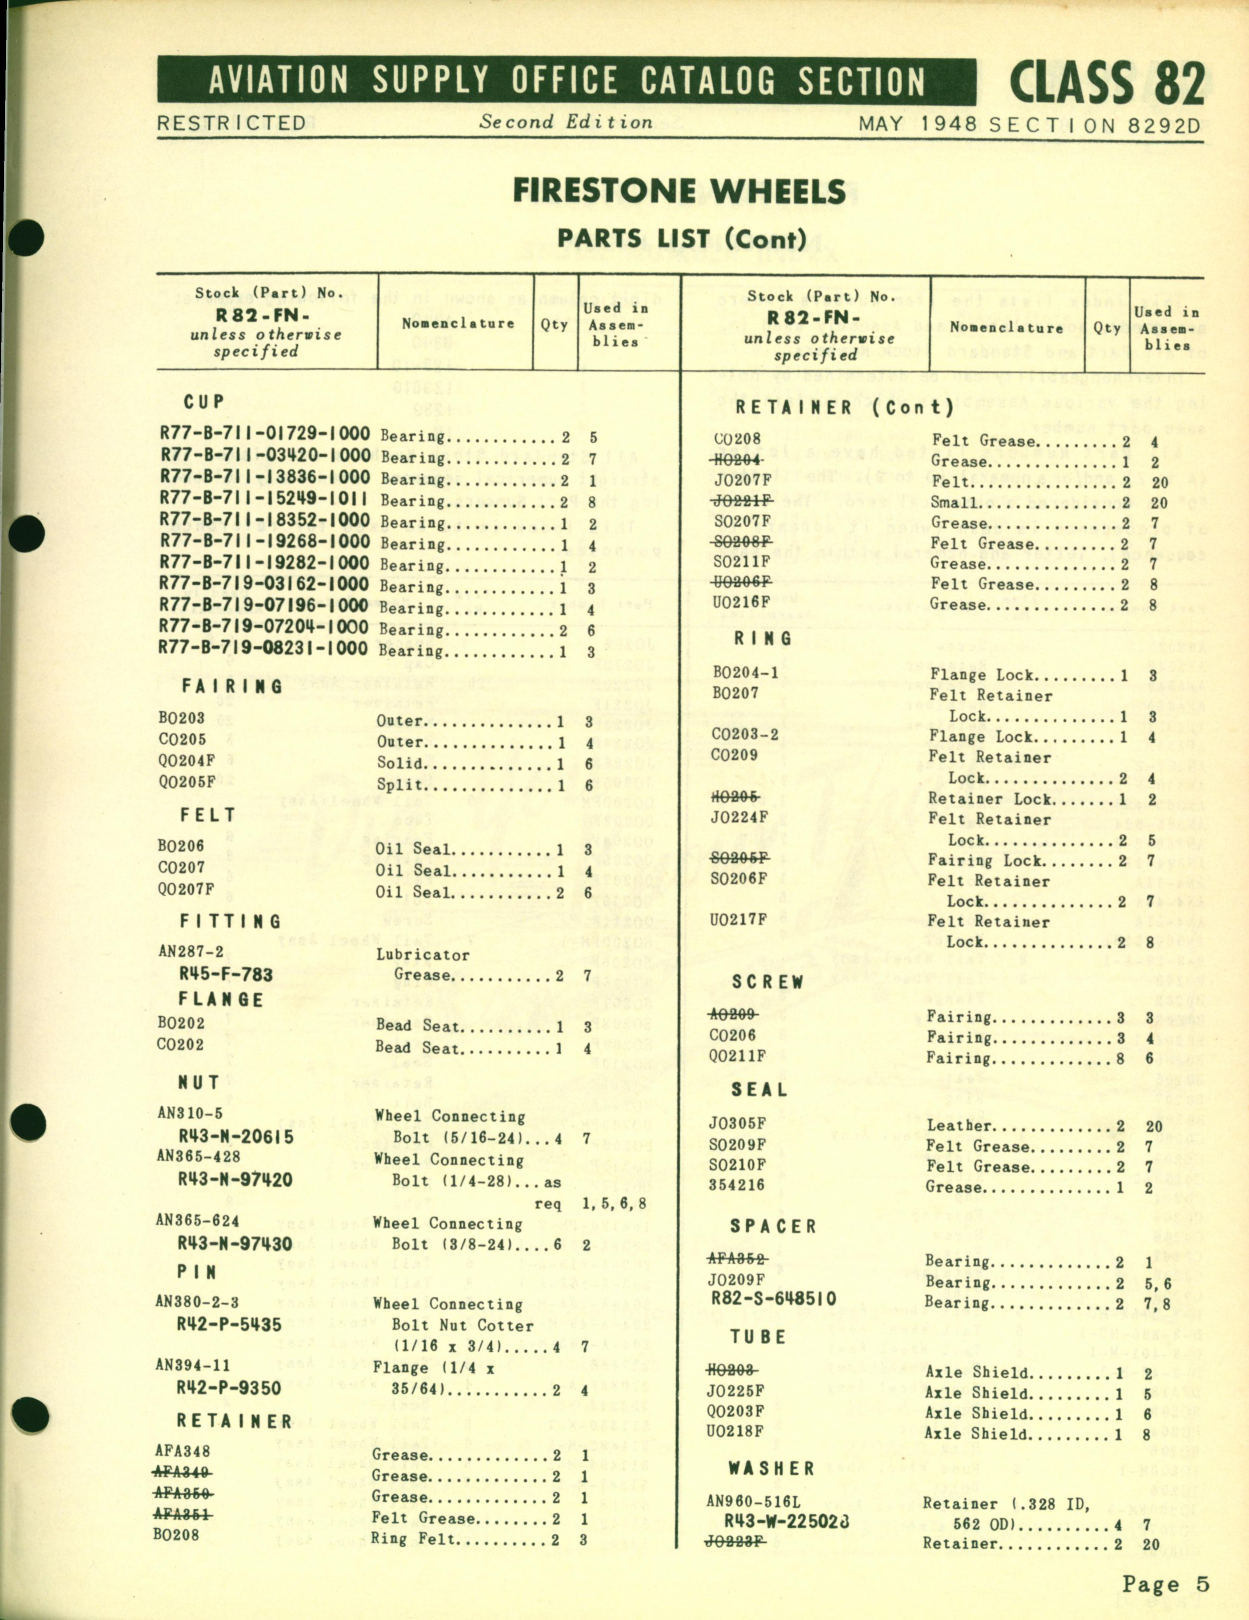 Sample page 5 from AirCorps Library document: Firestone Wheels